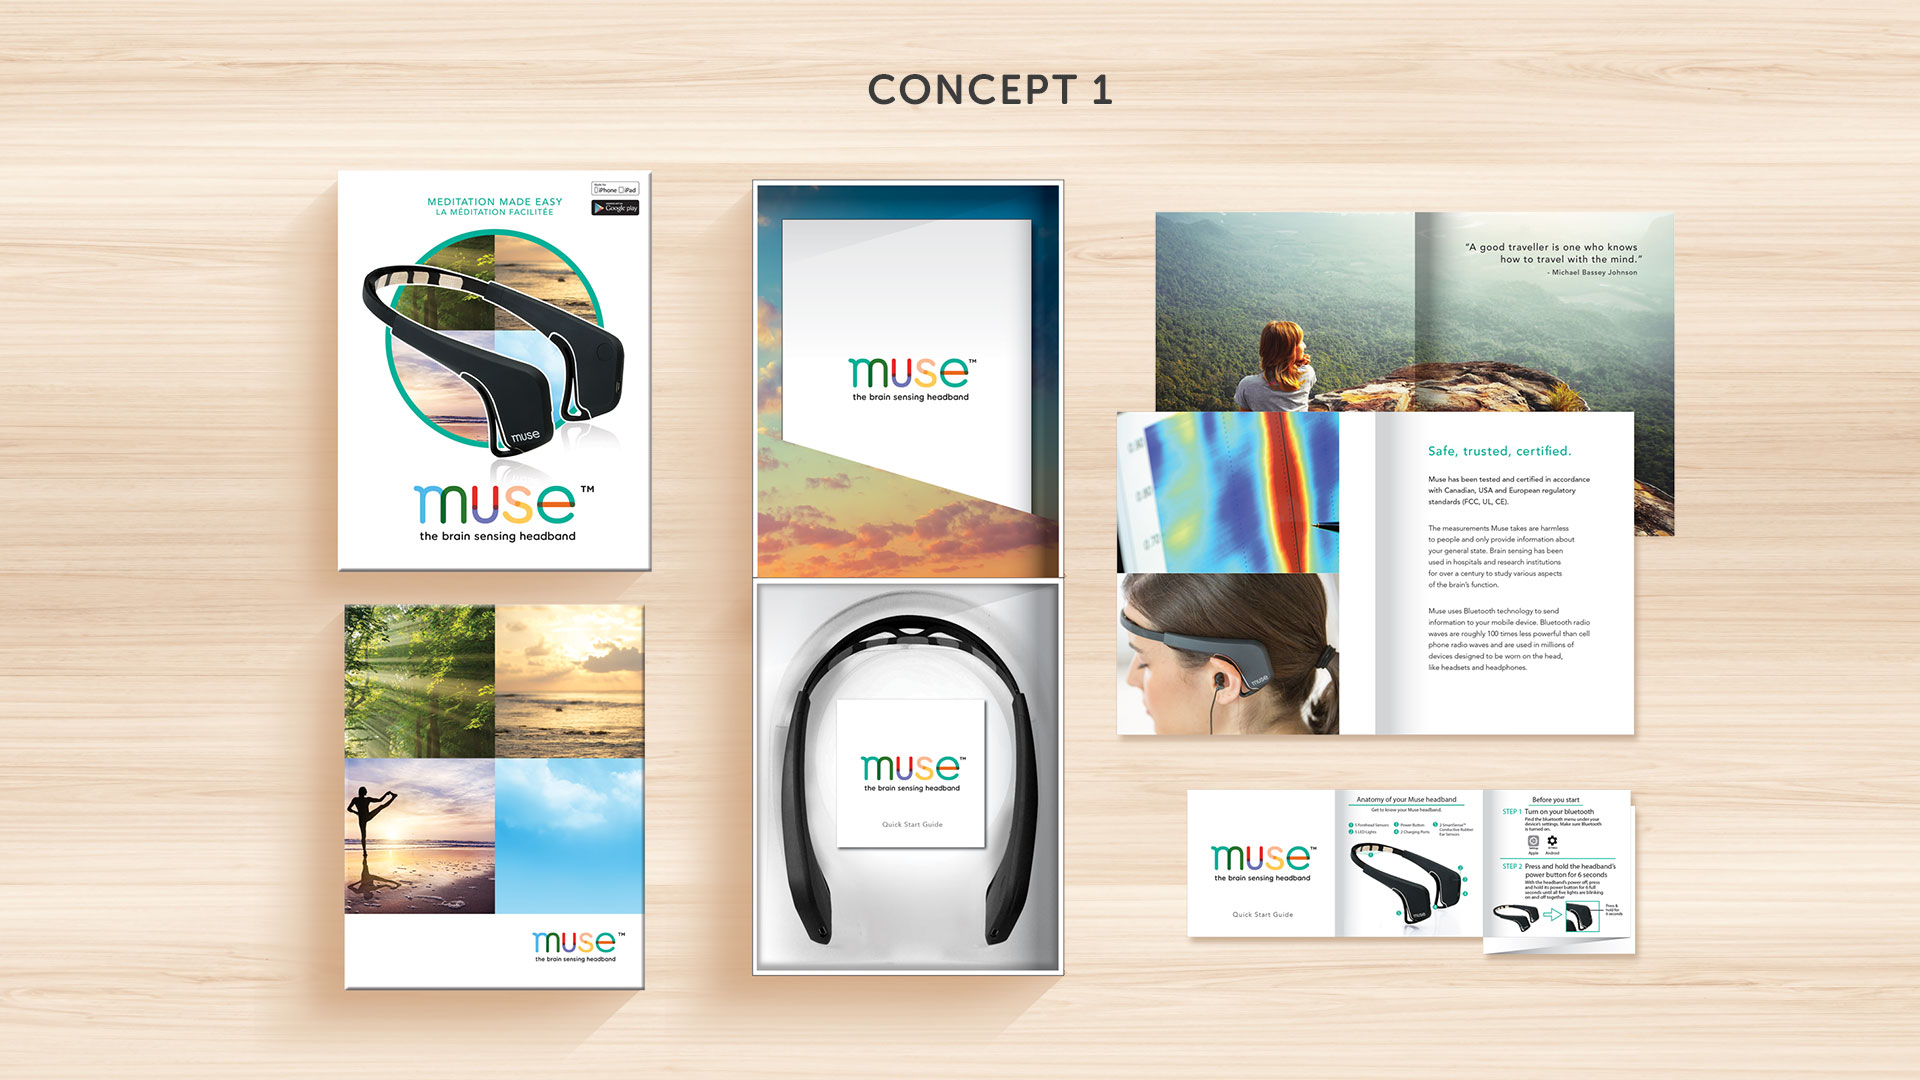 muse_concept1